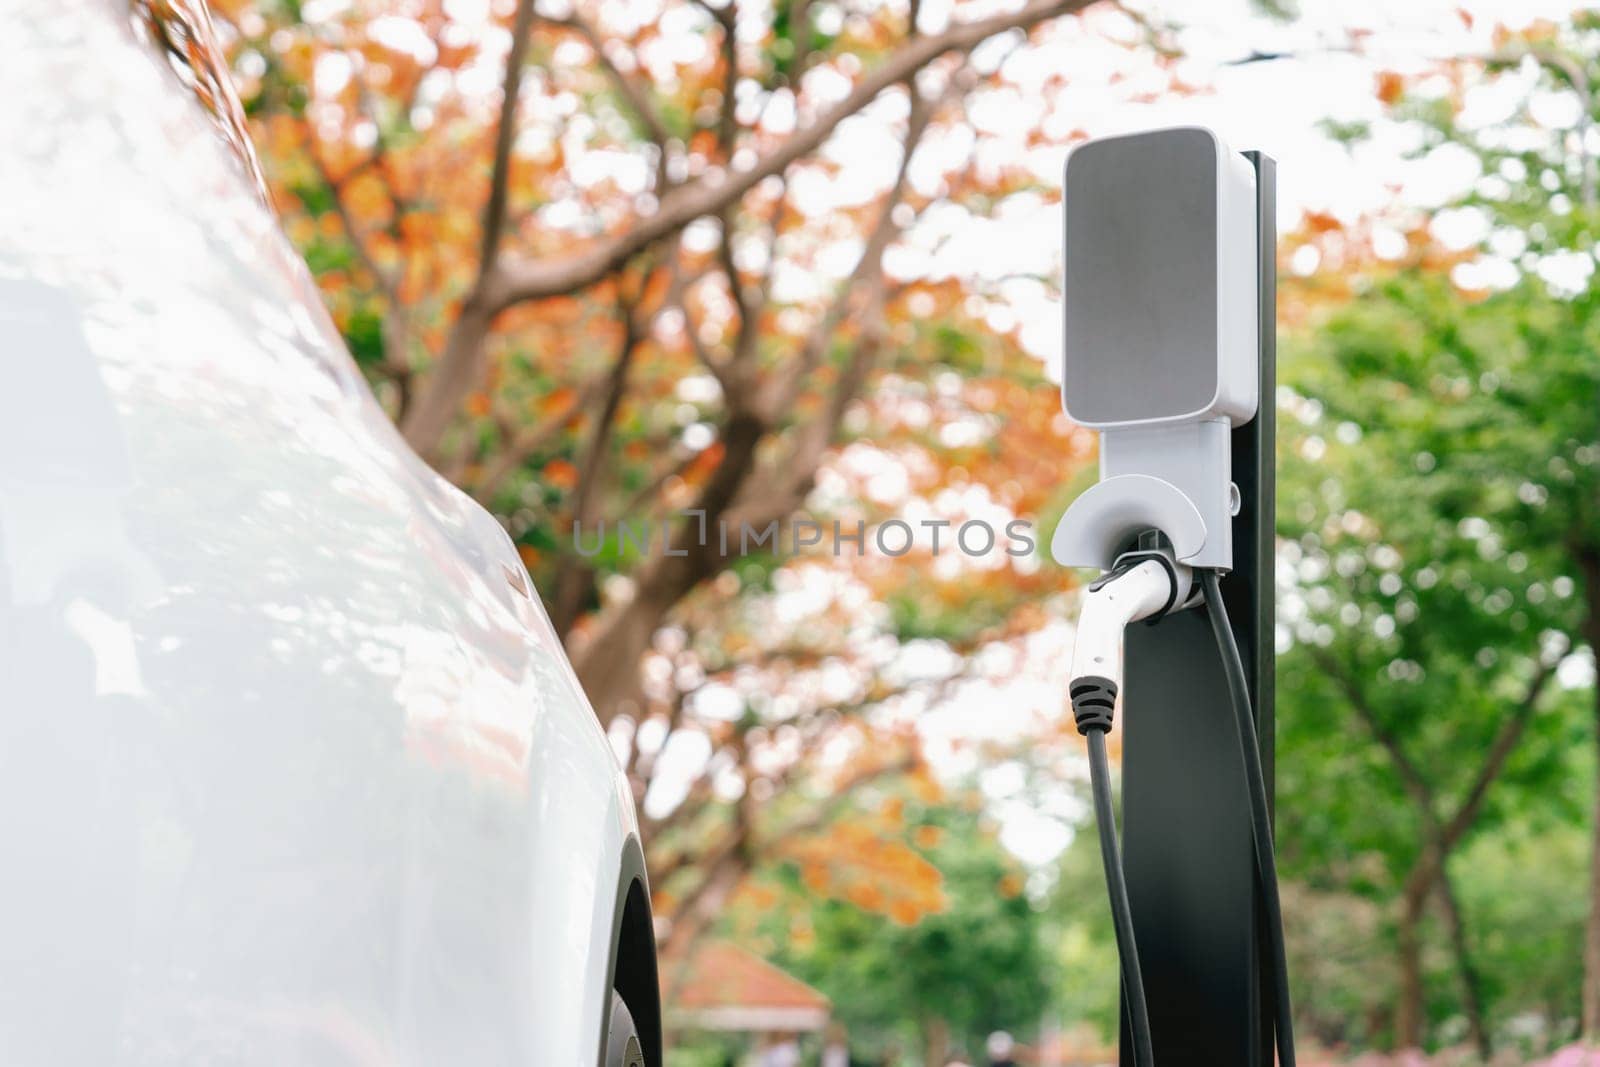 EV electric vehicle recharging battery from EV charging station in national park or outdoor autumn forest scenic. Natural protection with eco friendly EV car travel in the autumnal orange woods. Exalt